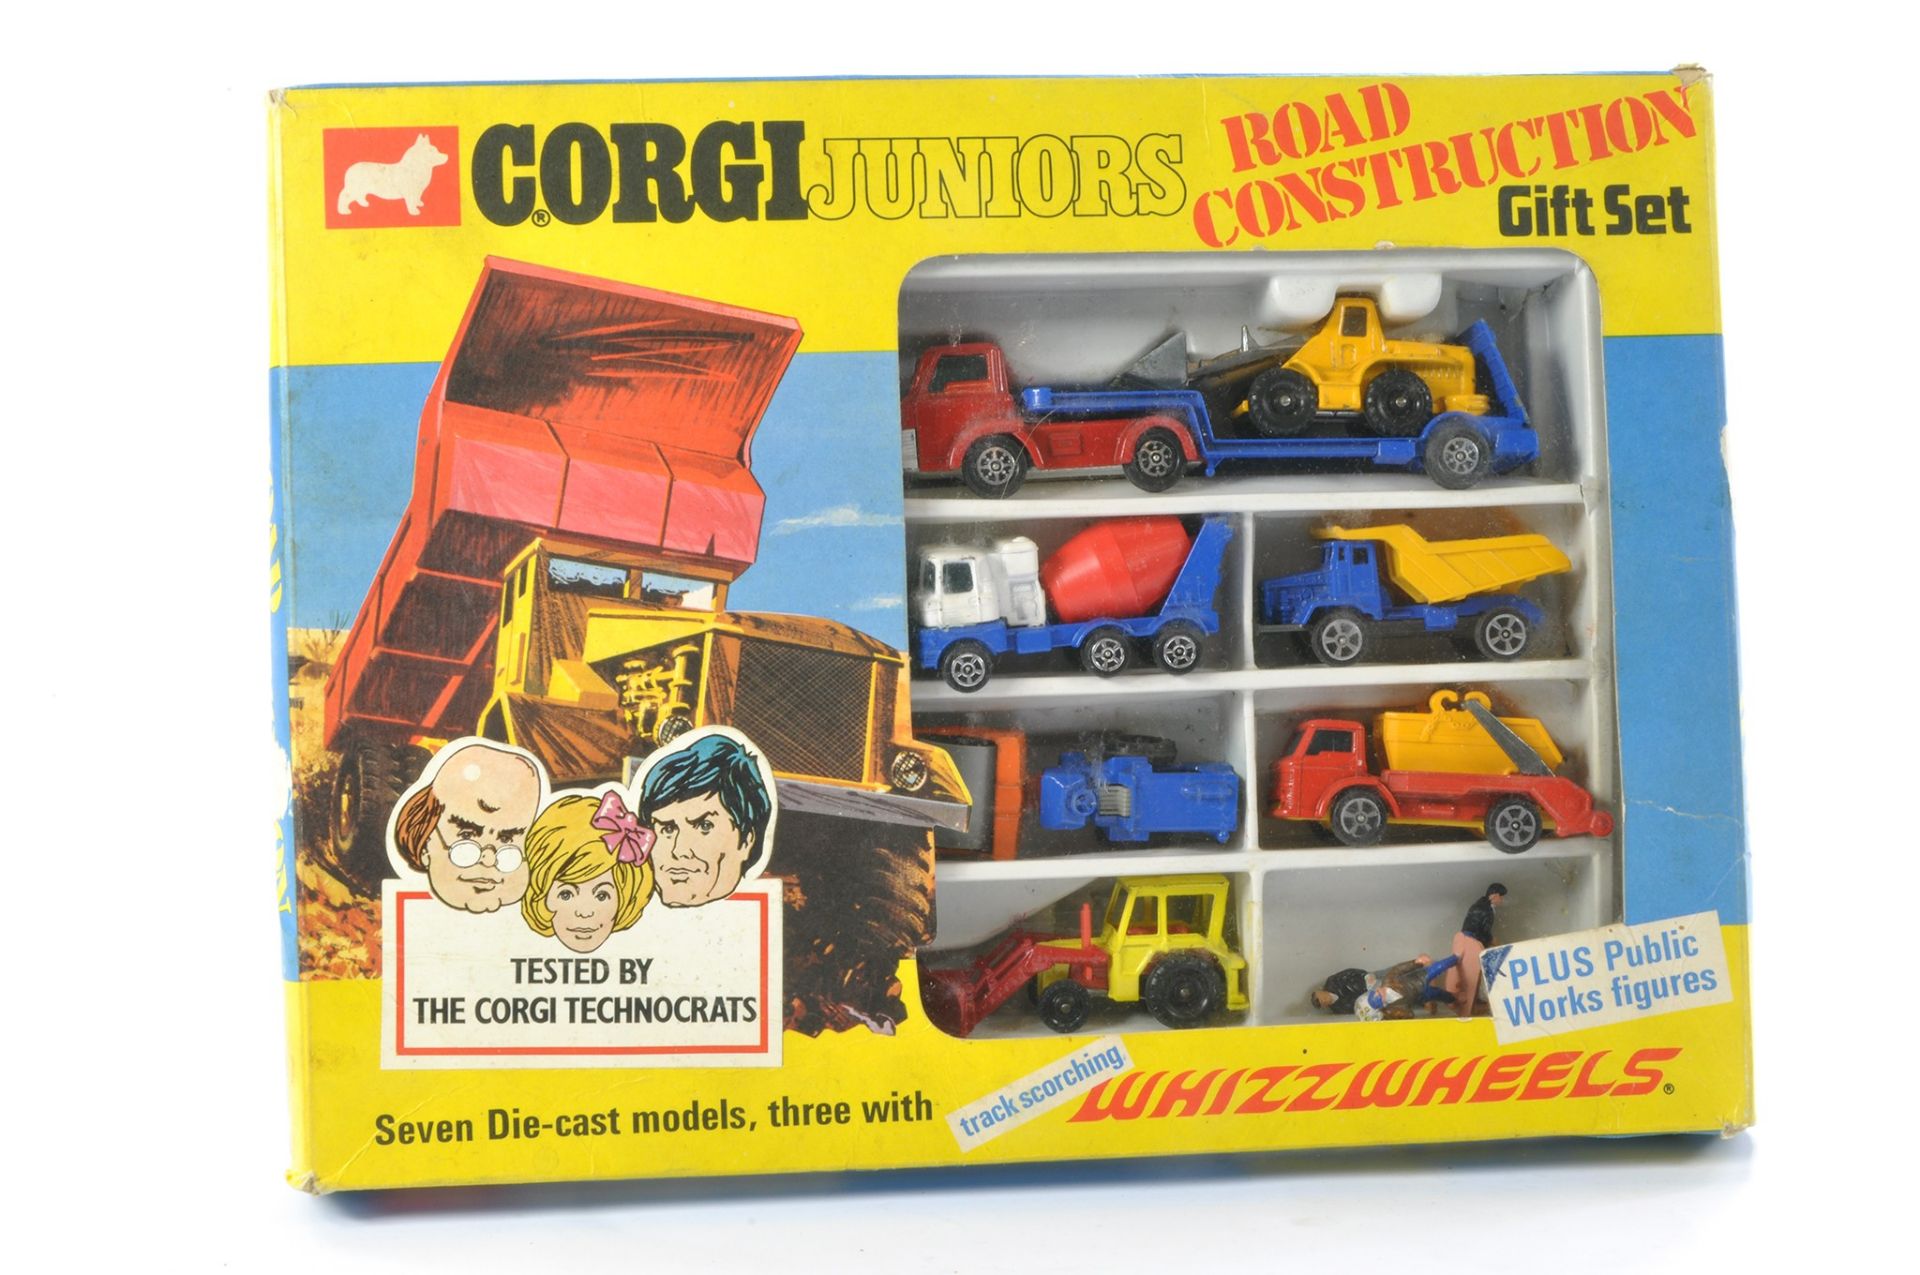 Corgi Juniors No. 3024 Road construction Gift Set. Complete with 7 vehicles and figures as shown.